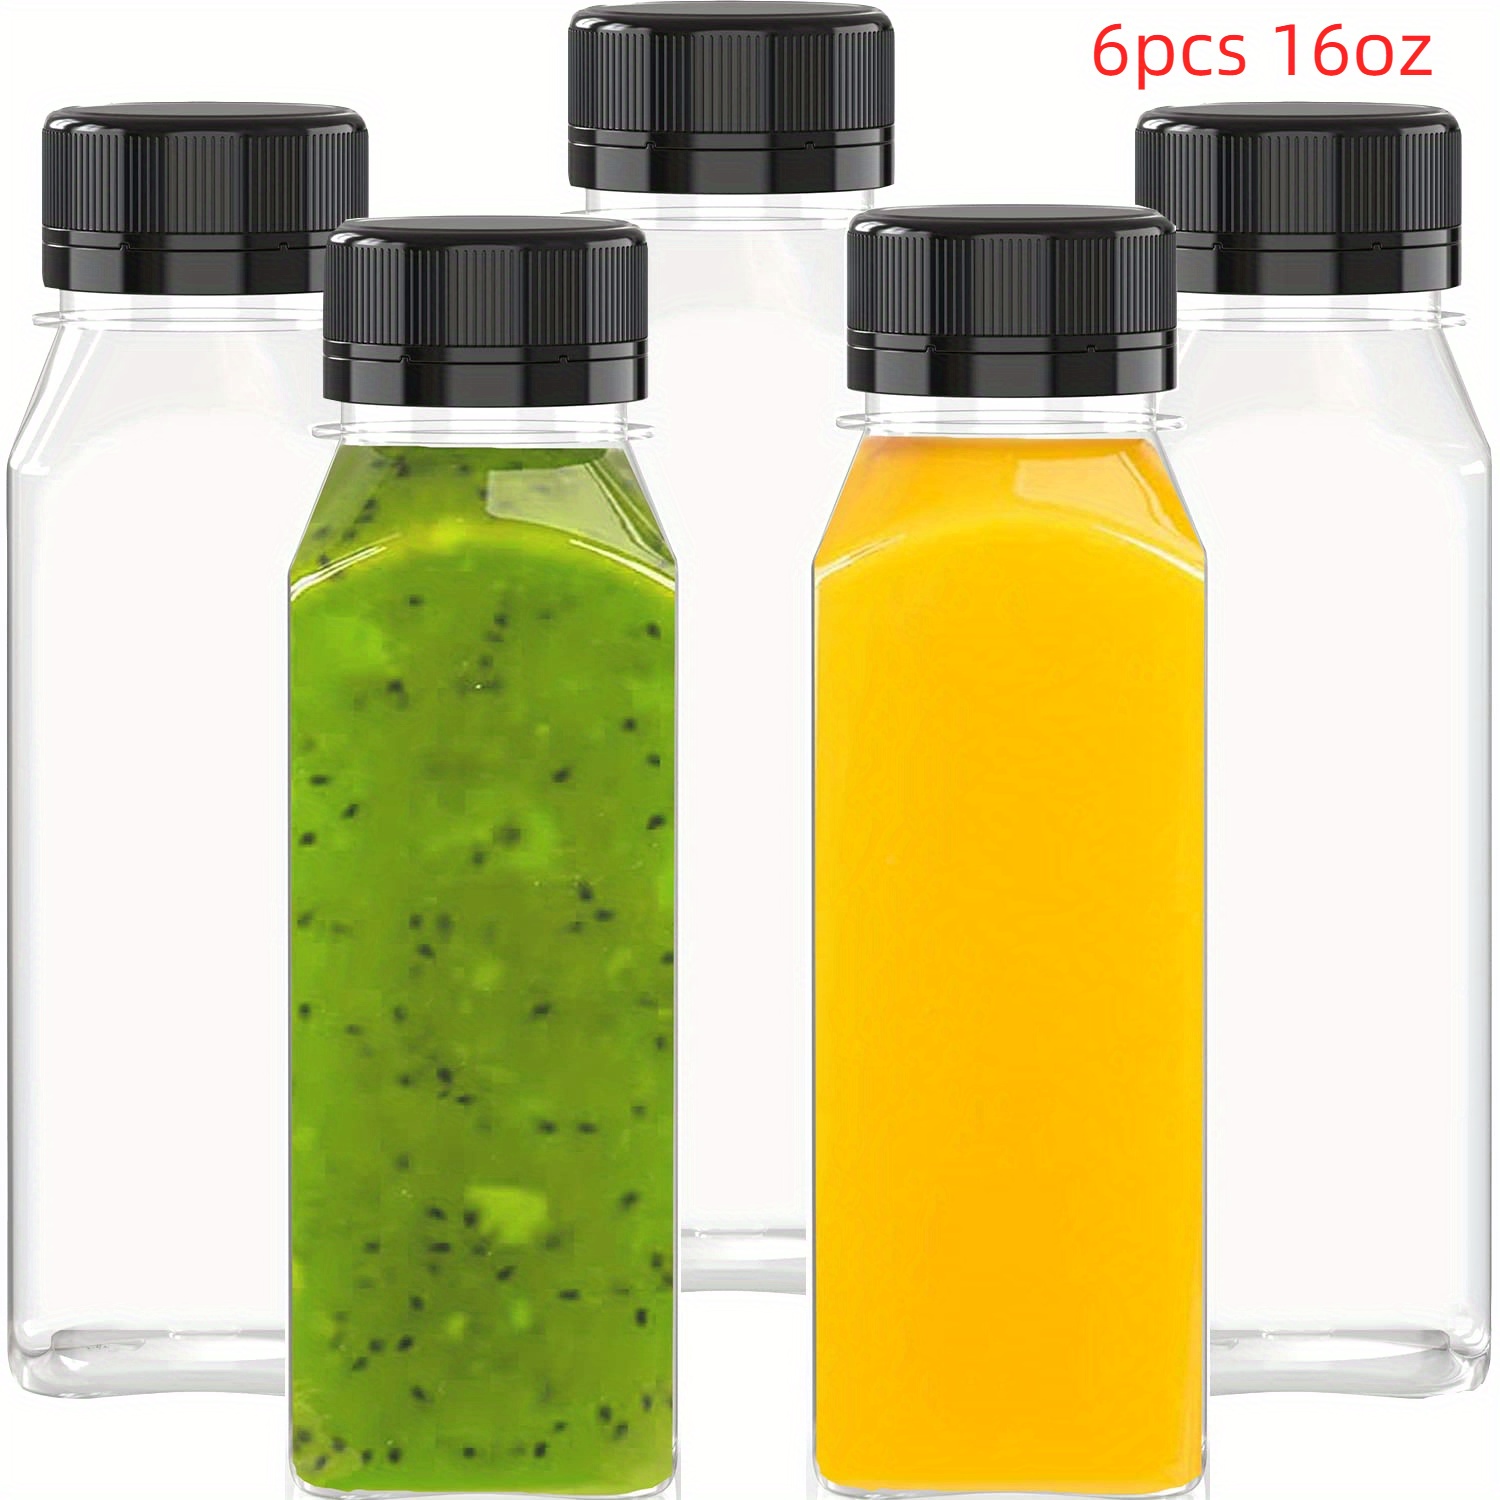 16oz Empty Clear Plastic Juice Bottles with Tamper Evident Caps